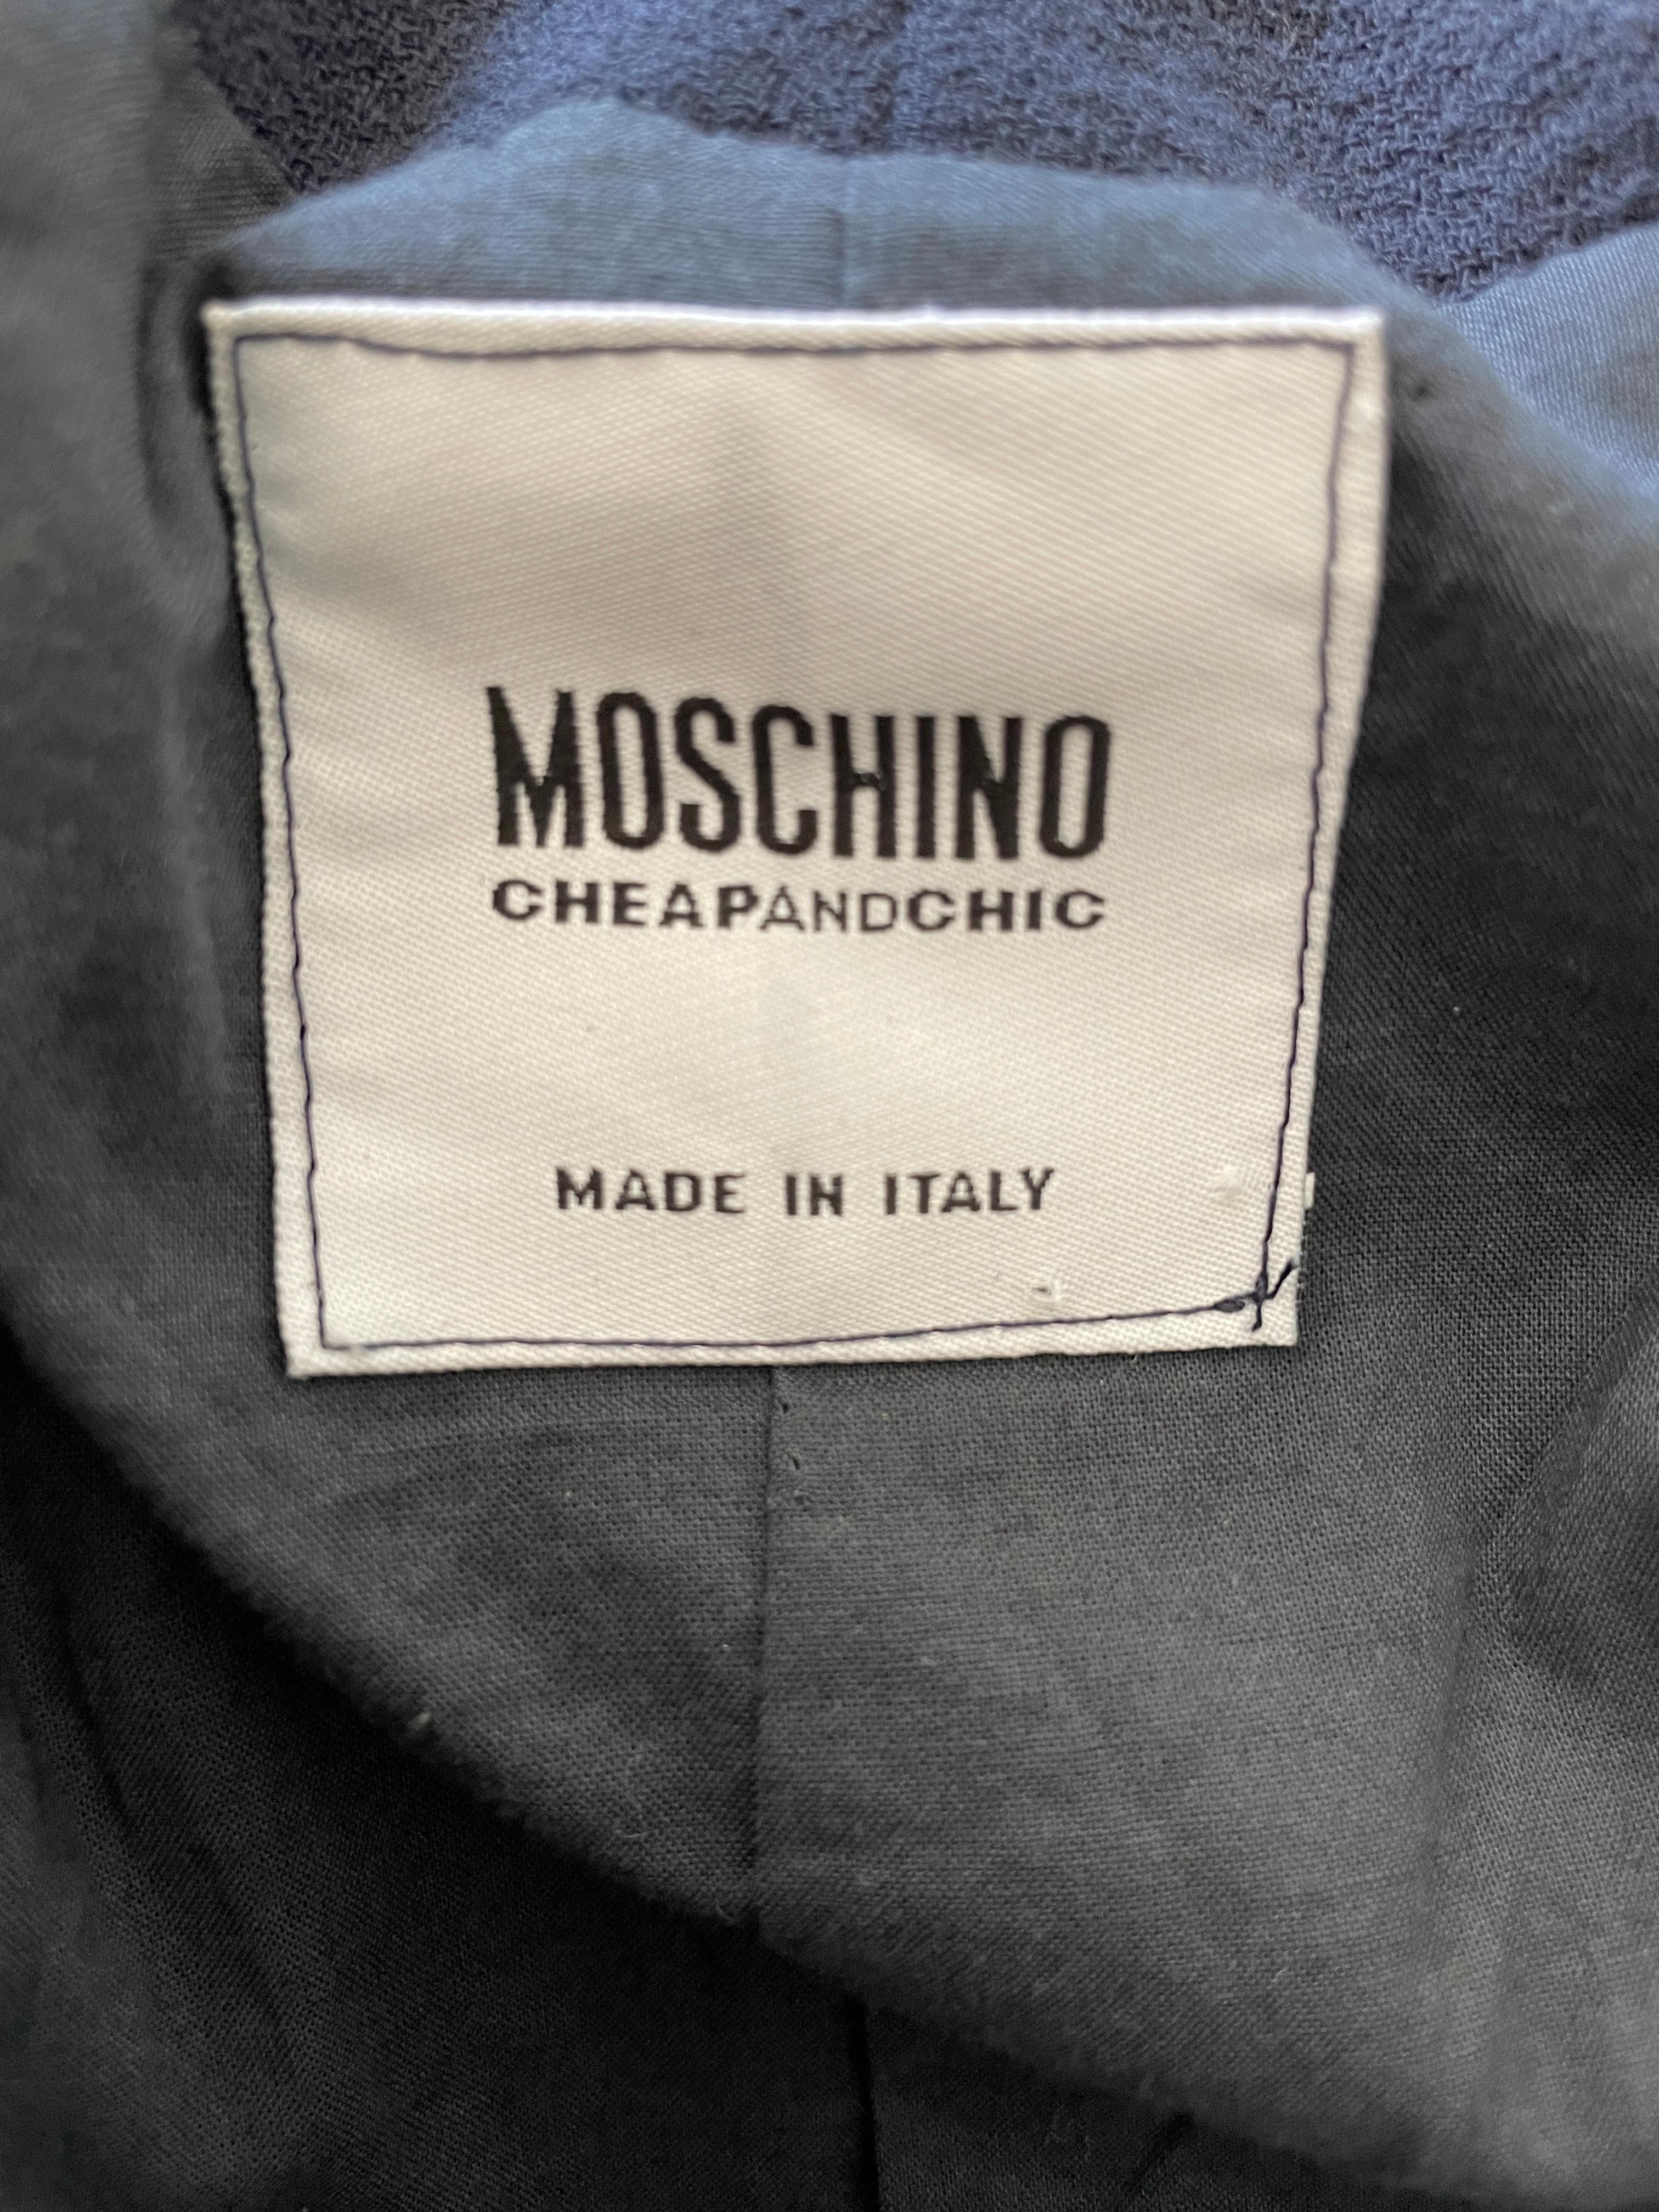 Moschino Cheap & Chic Vintage 